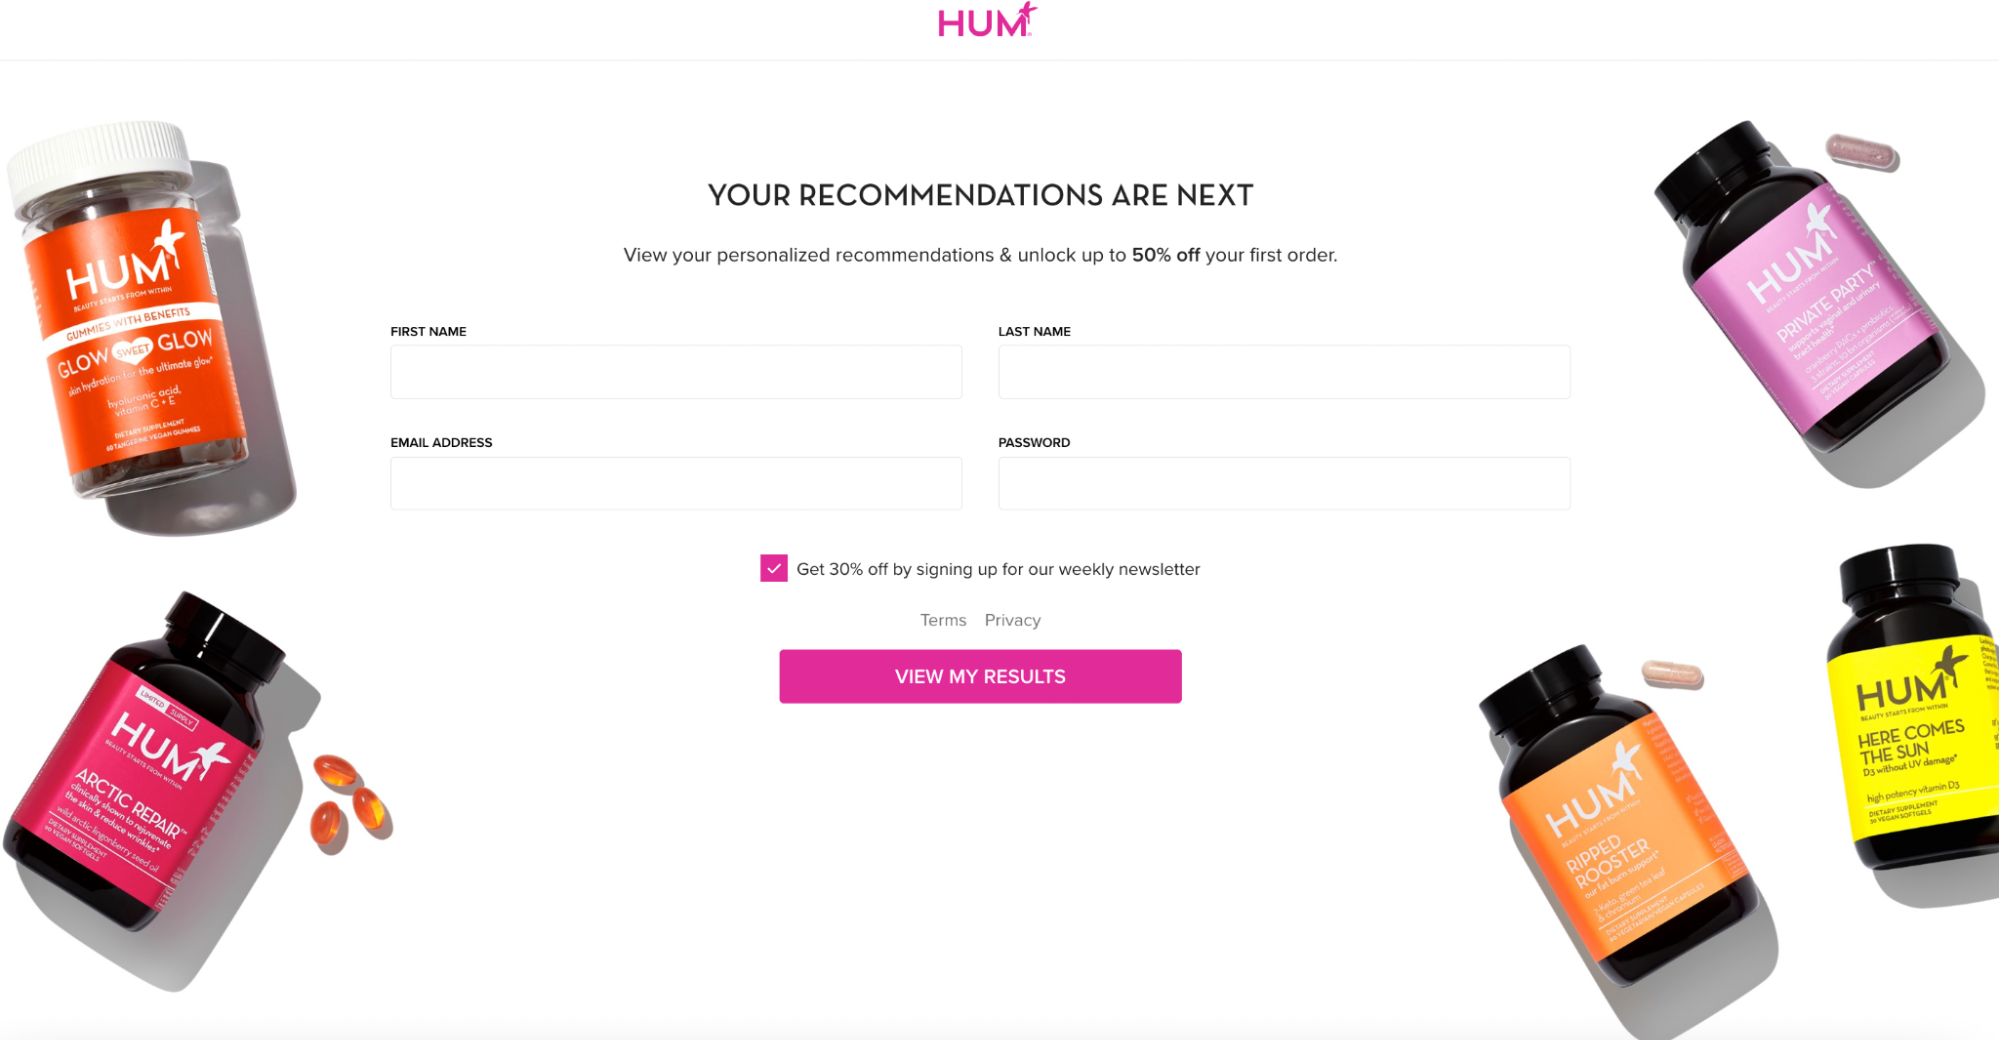 HUM supplements your recommendations are next page including email form